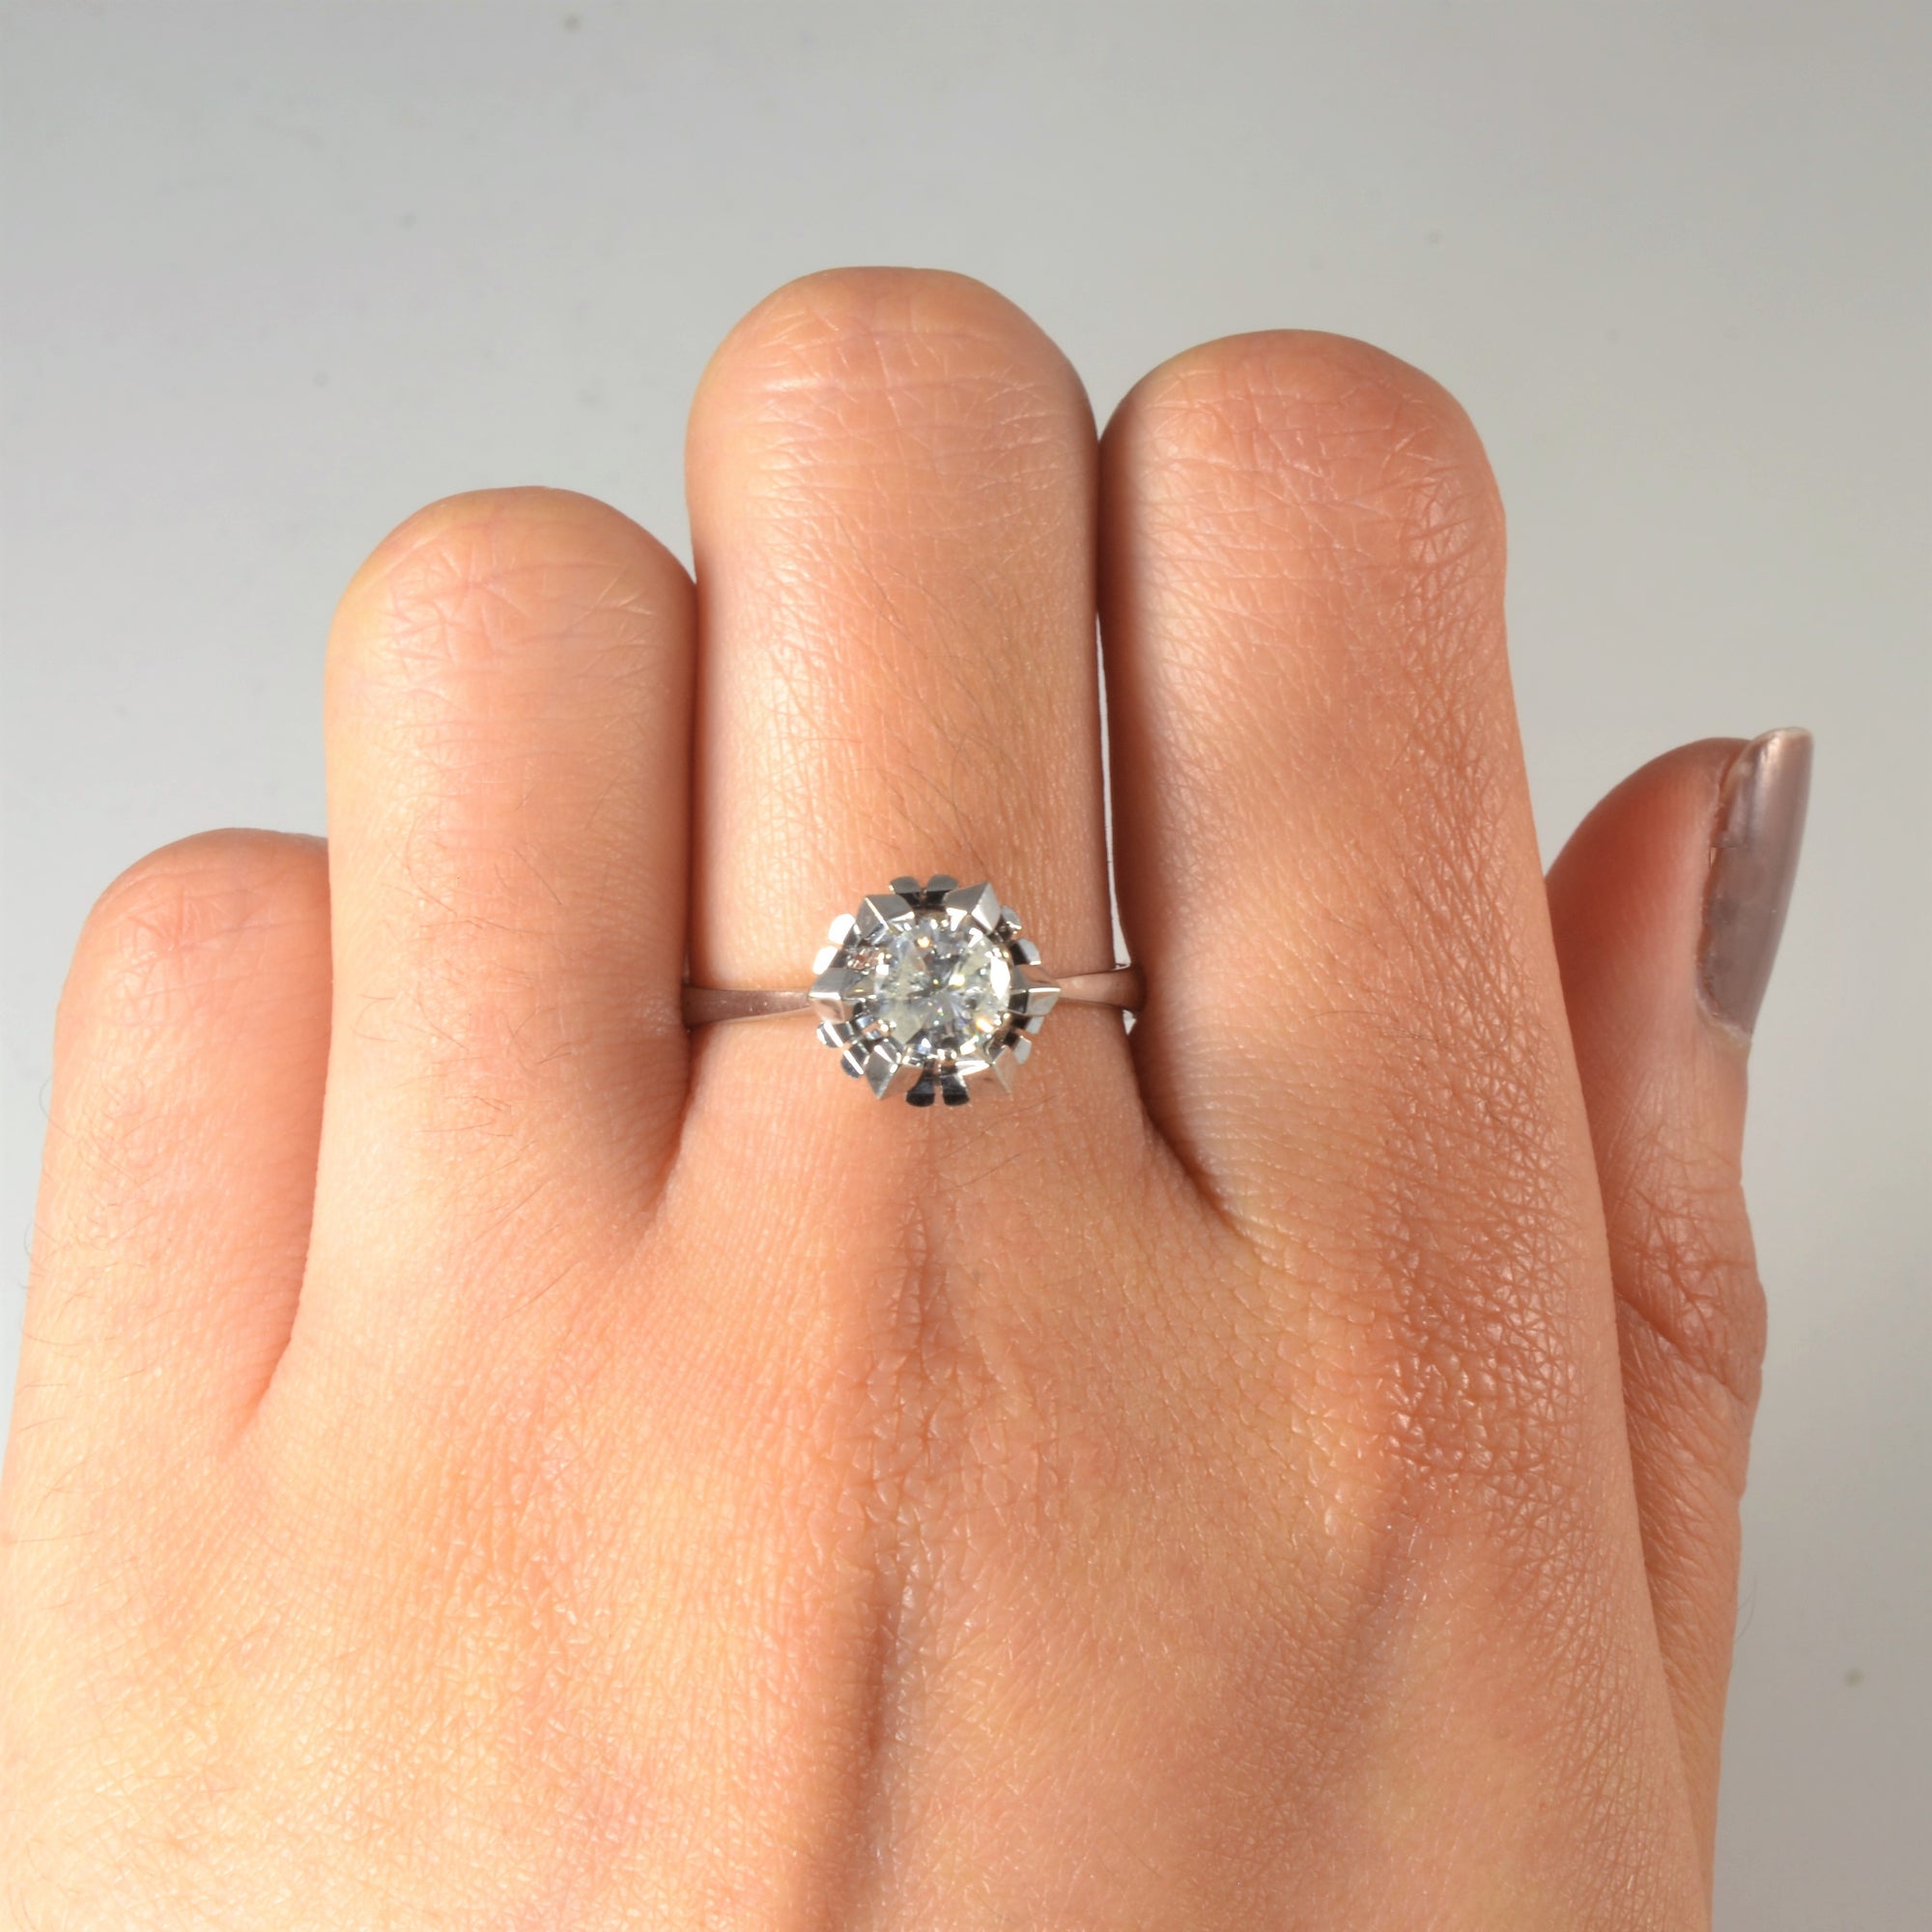 1960s High Set Solitaire Engagement Ring | 0.58ct | SZ 8.75 |